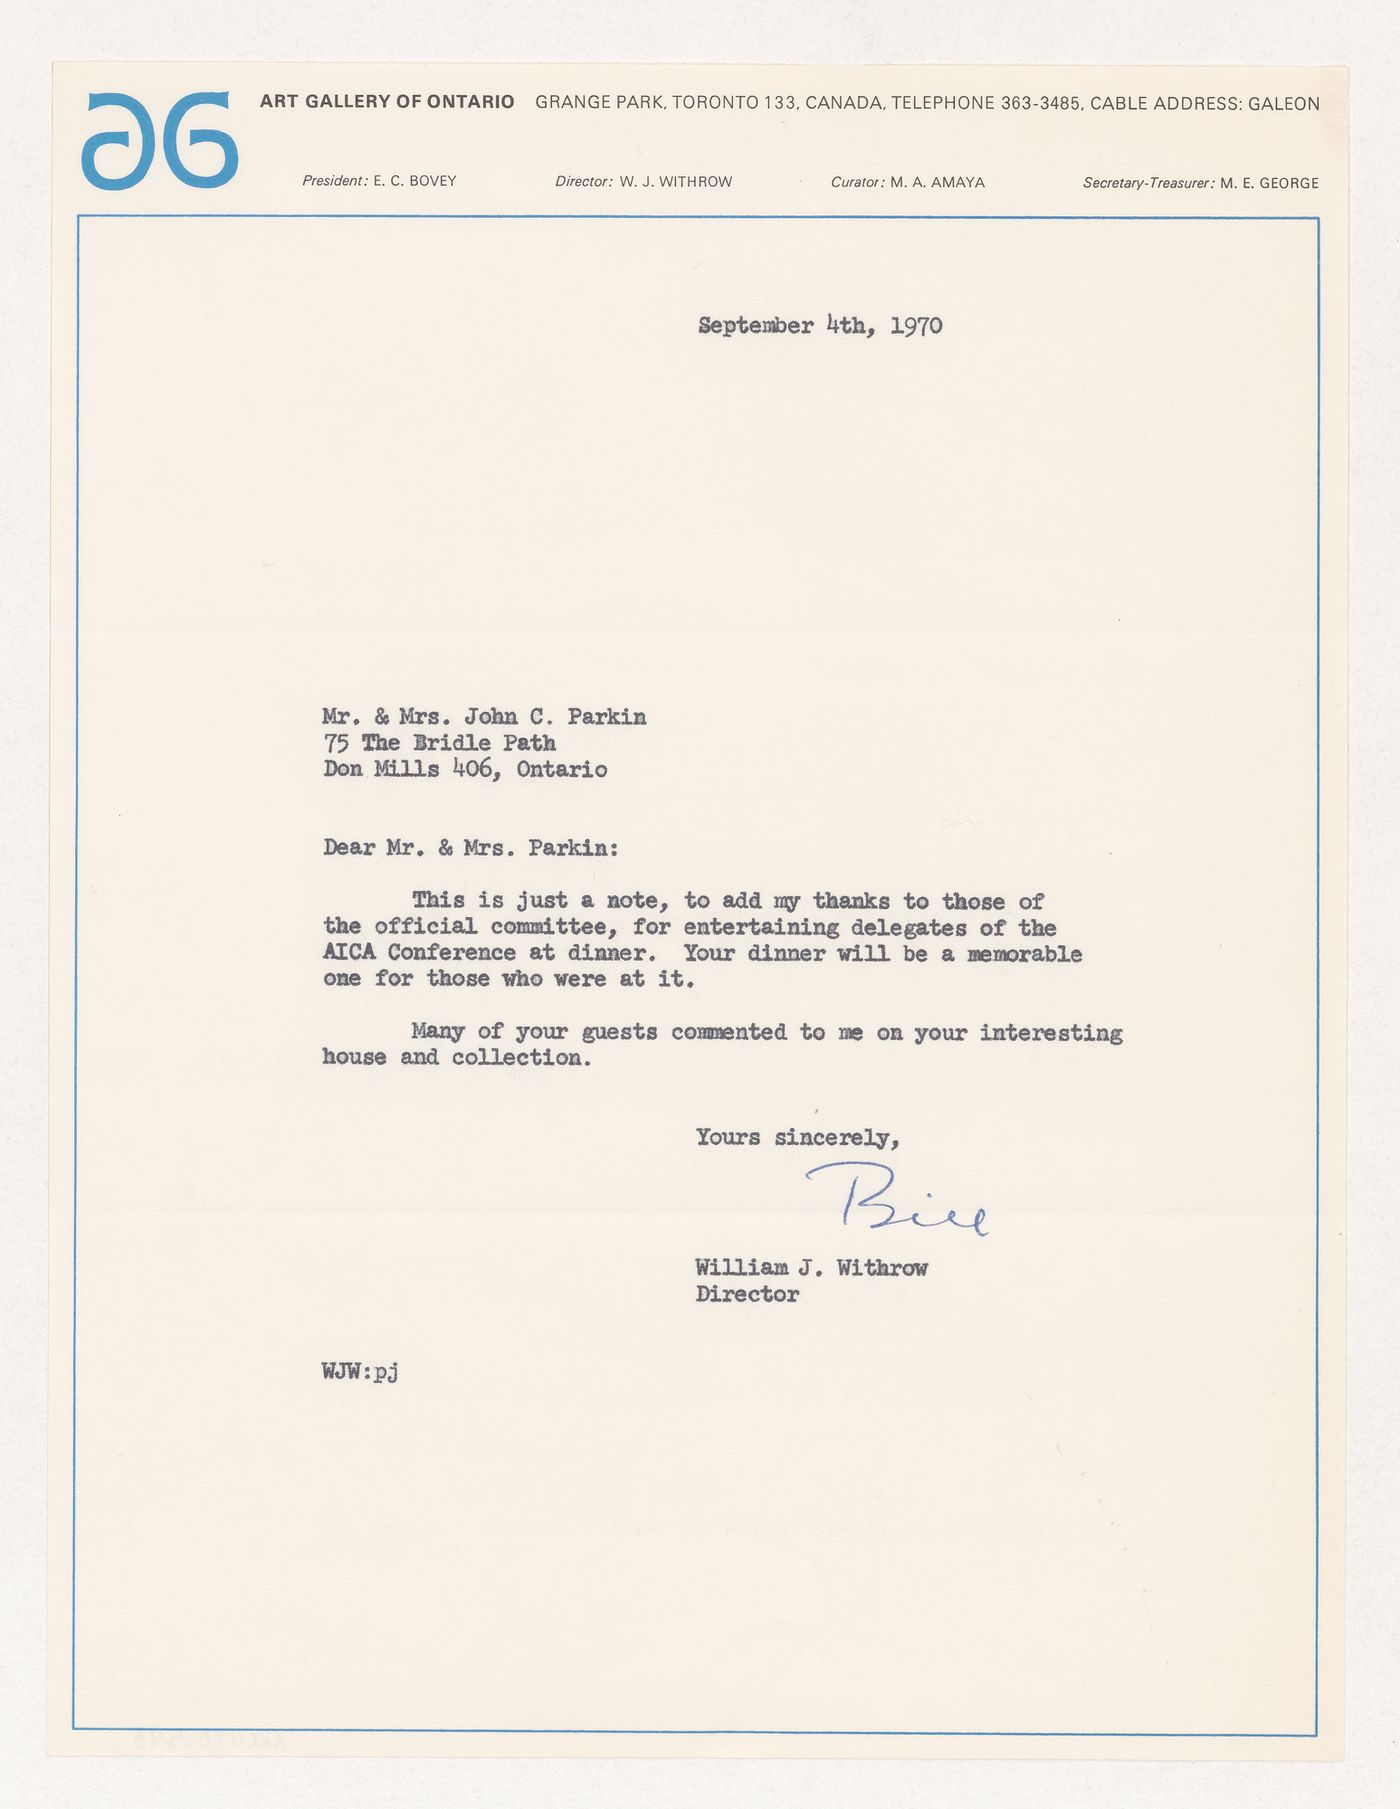 Letter from AGO director William J. Withrow to Parkin on AICA dinner at Parkin's home